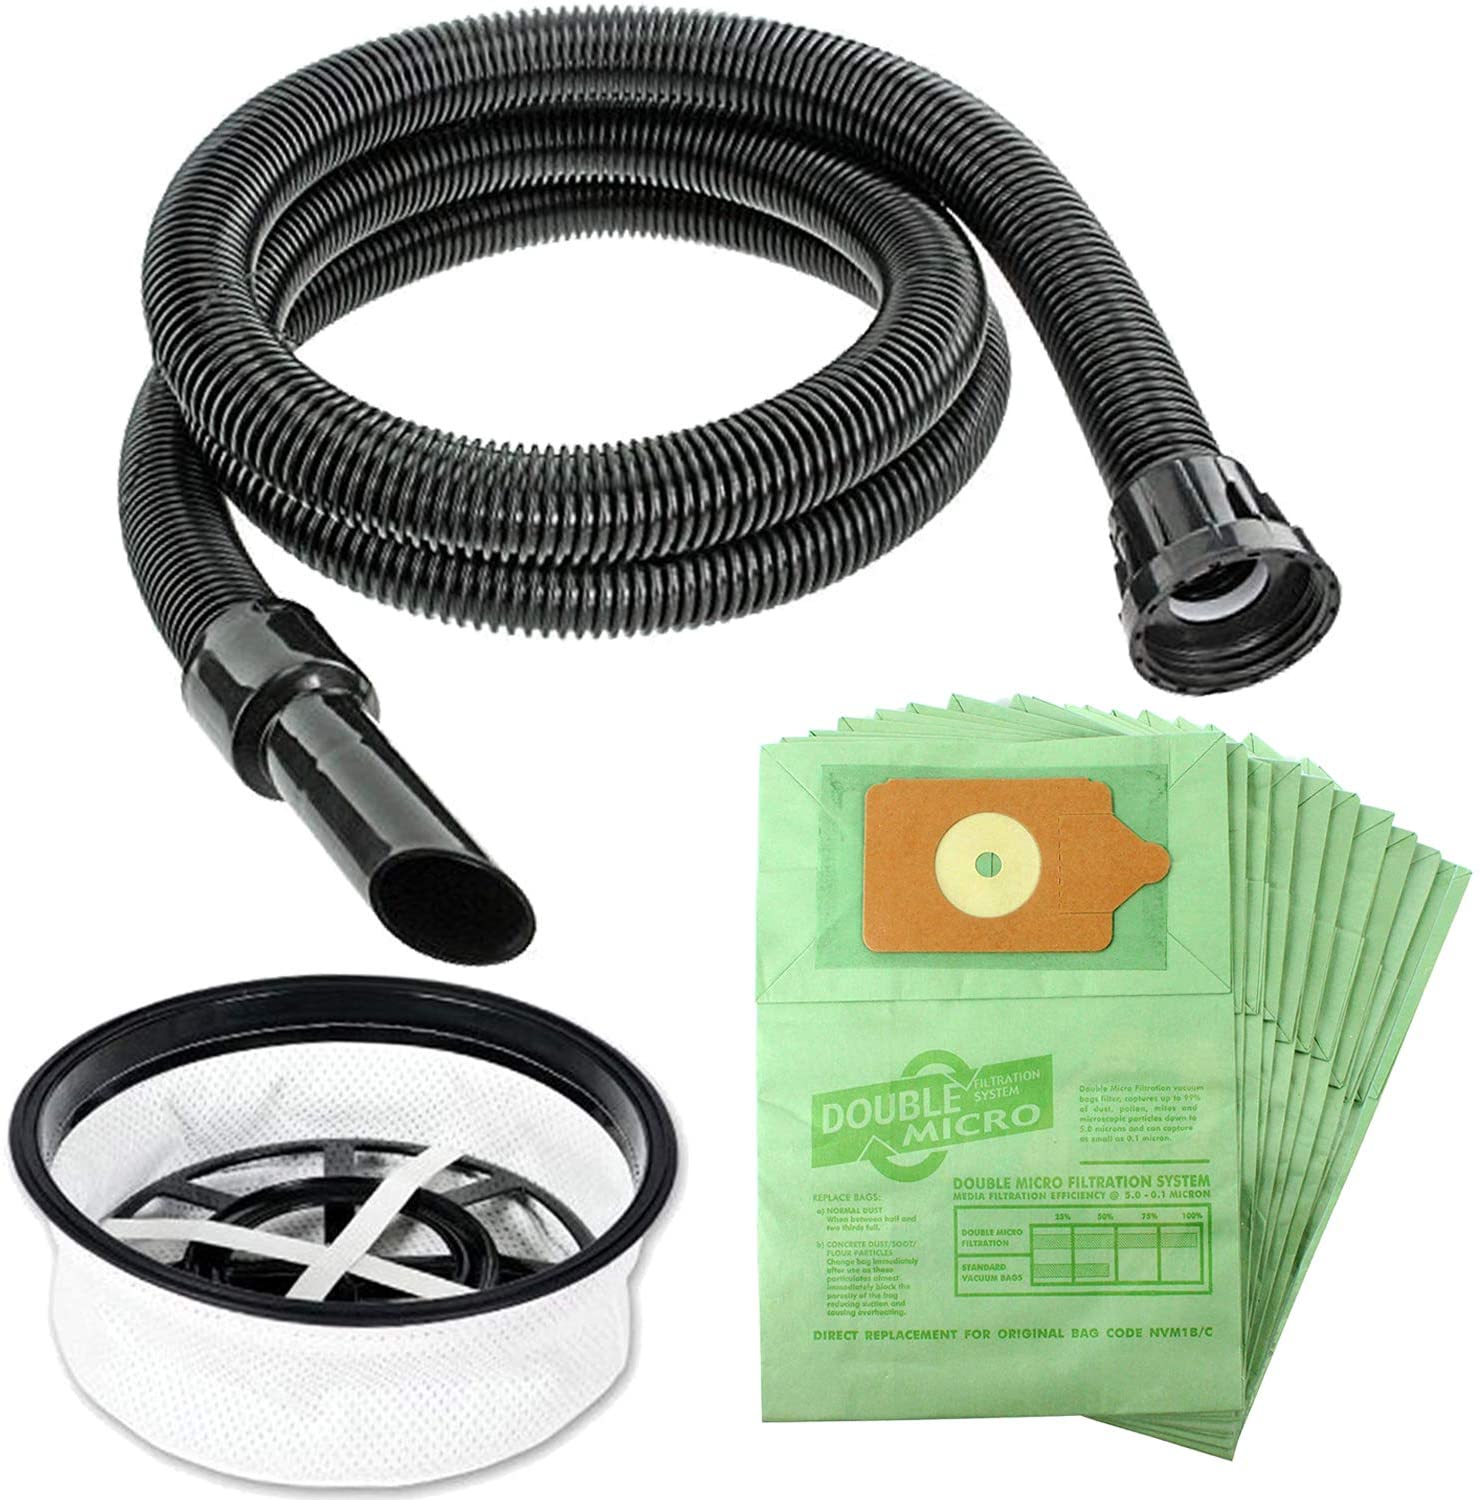 2.6m XL Hose Pipe, 10 Dust Bags & 12" Round Filter for Numatic Henry James Charles George Hoover Vacuum Cleaner